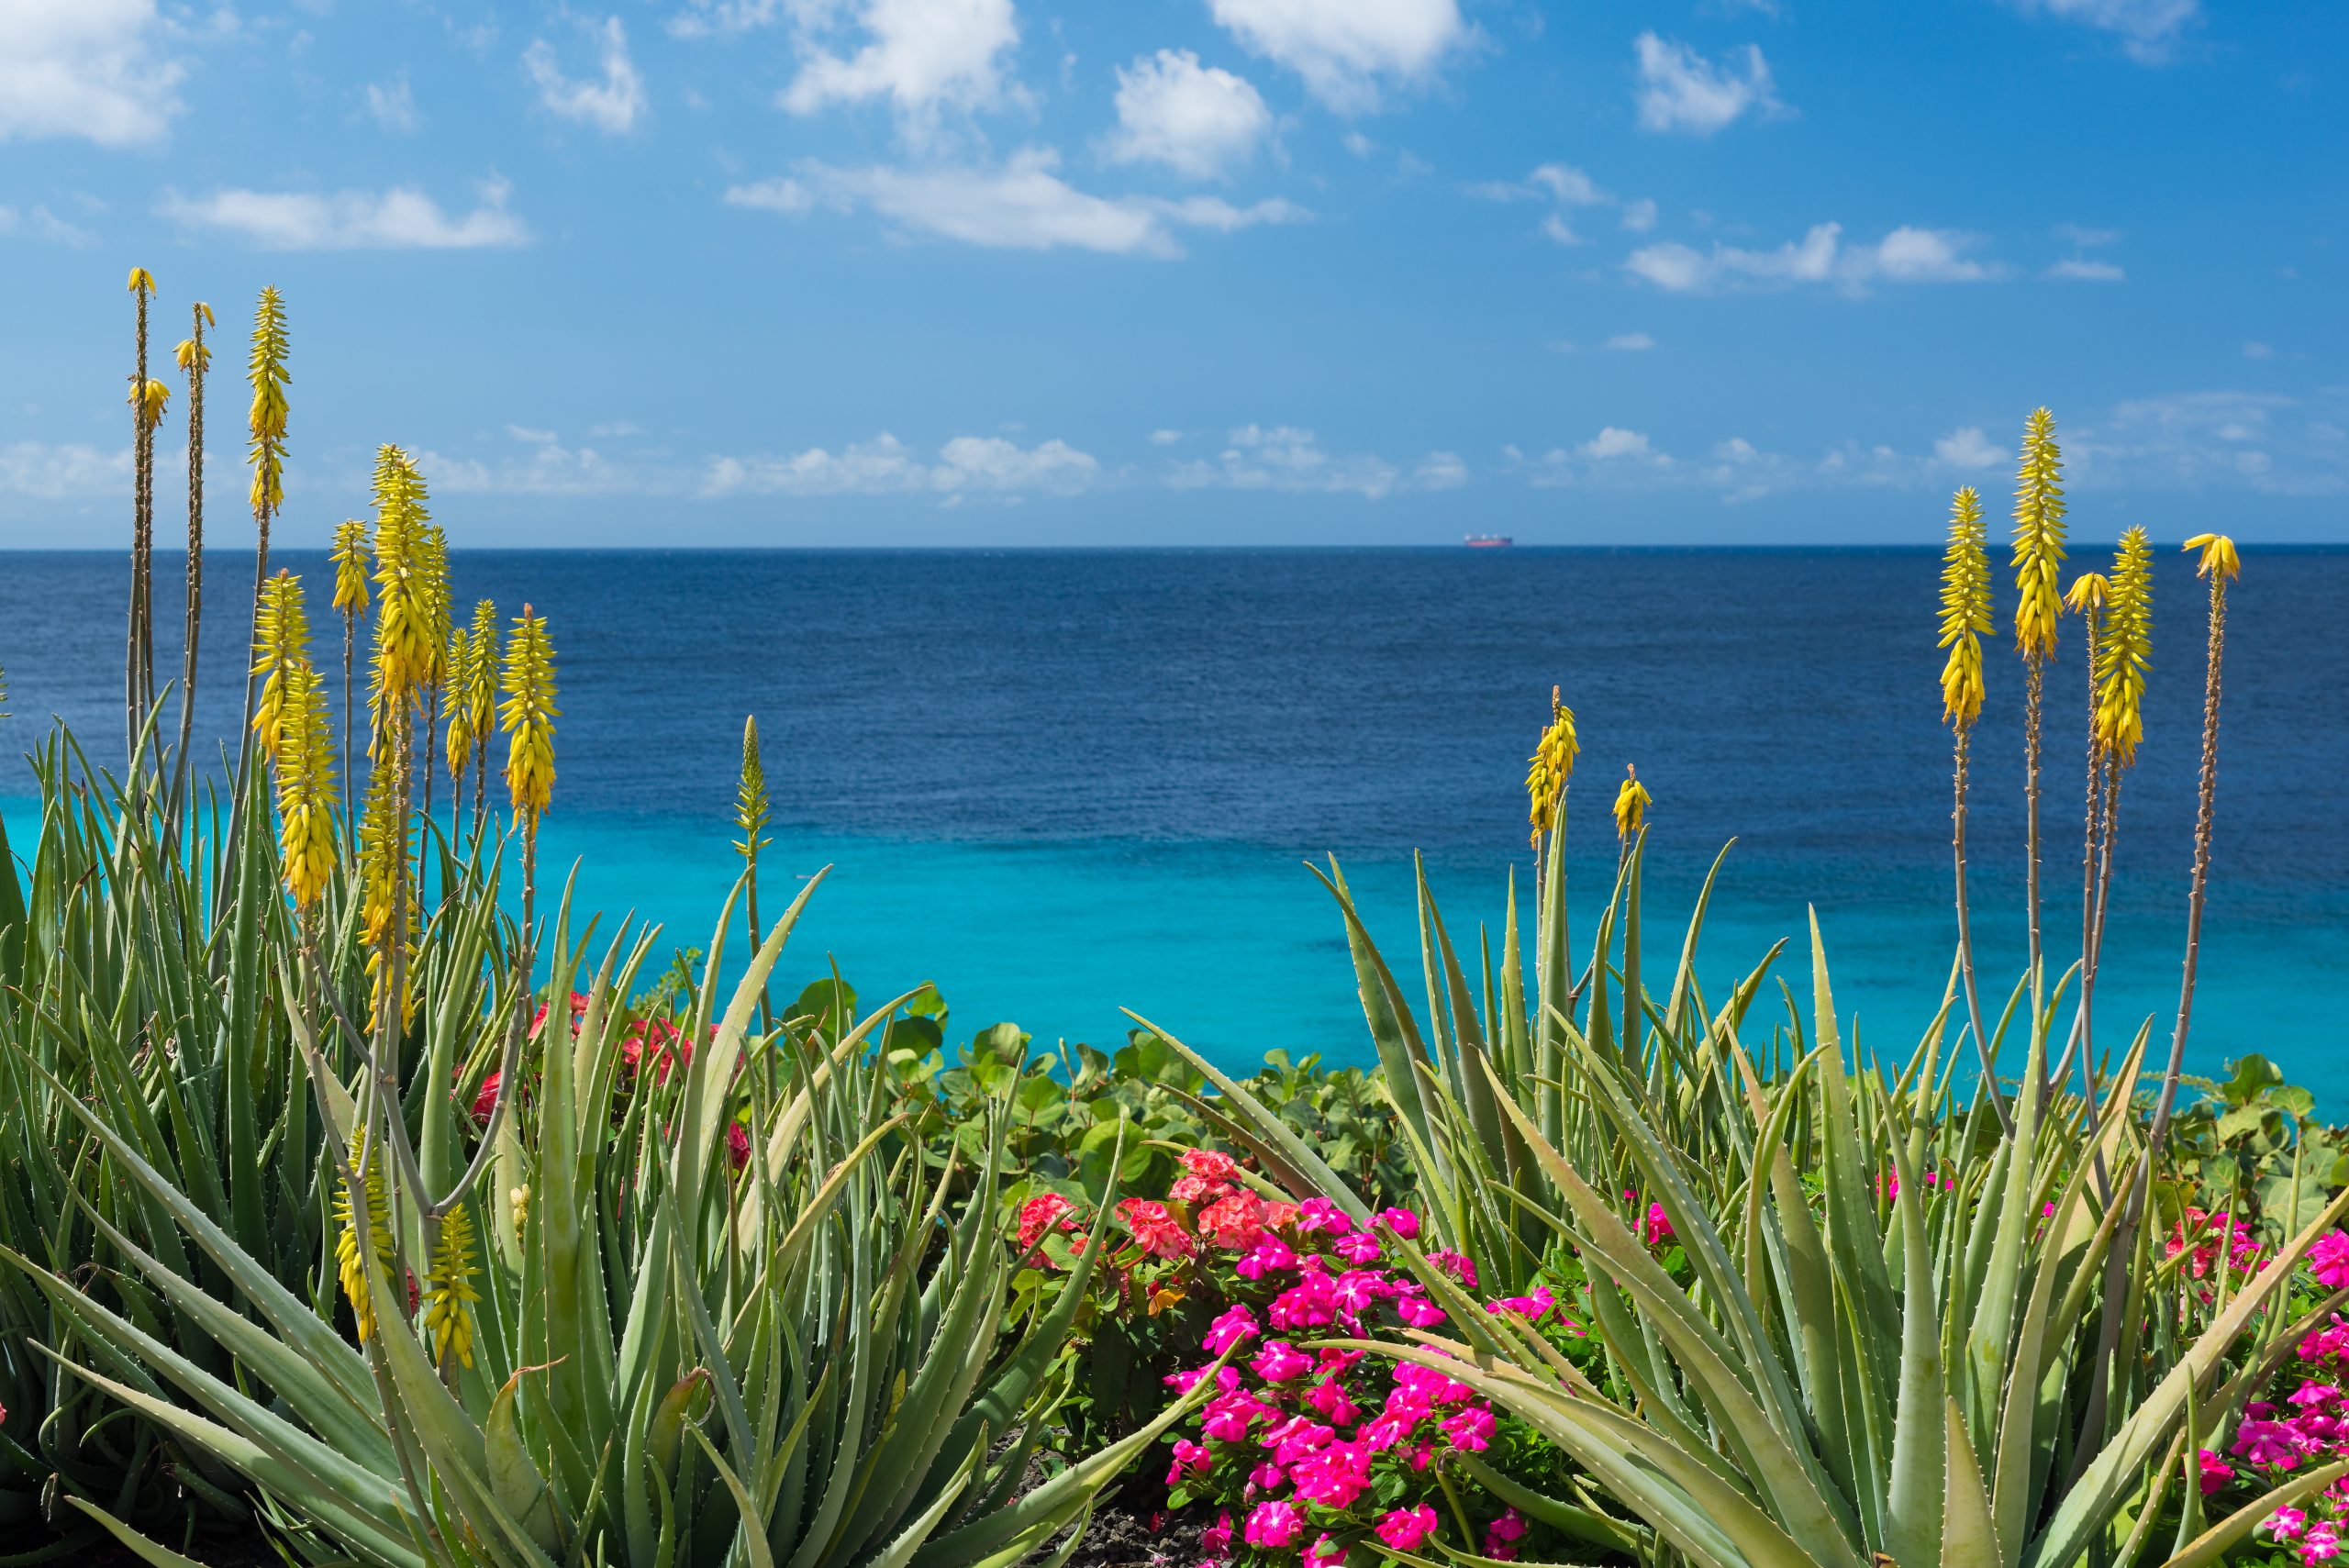 blossoming-yellow-flowers-aloe-vera-plant-and-blue-sea-curacao-island